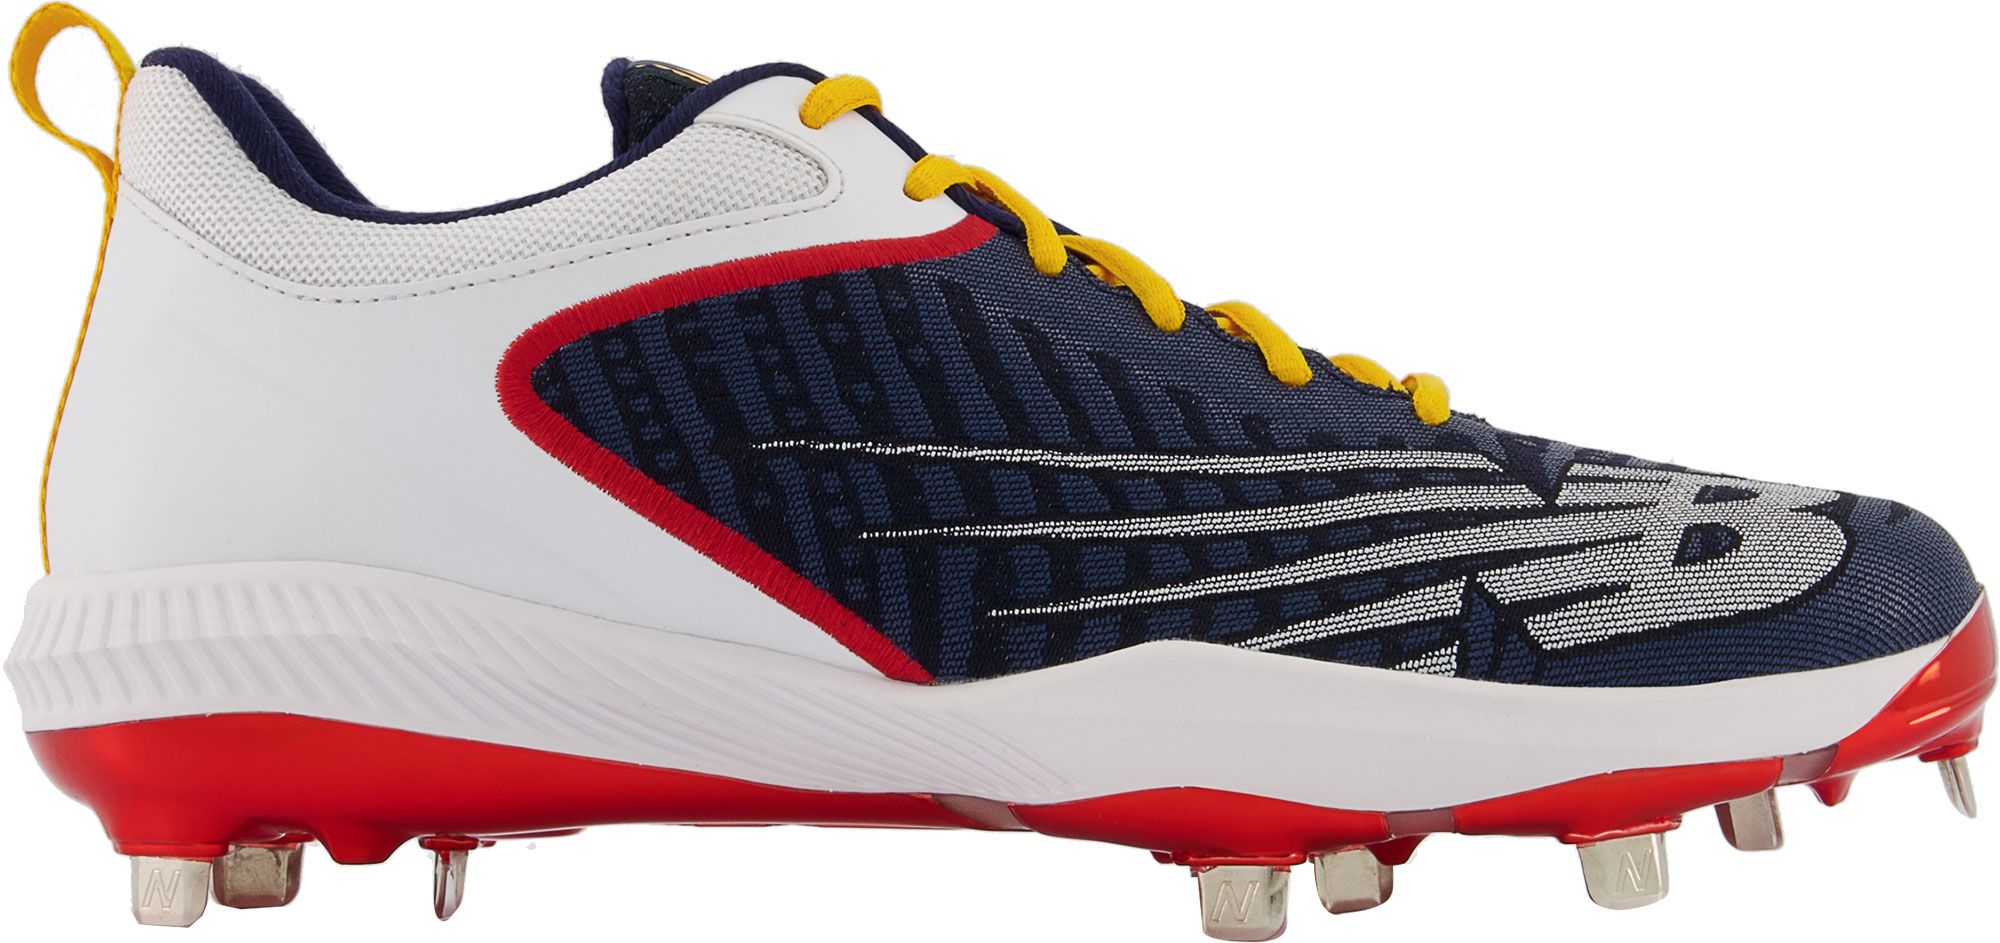 What Pros Wear: Ronald Acuña's New Balance 4040v5 Cleats - What